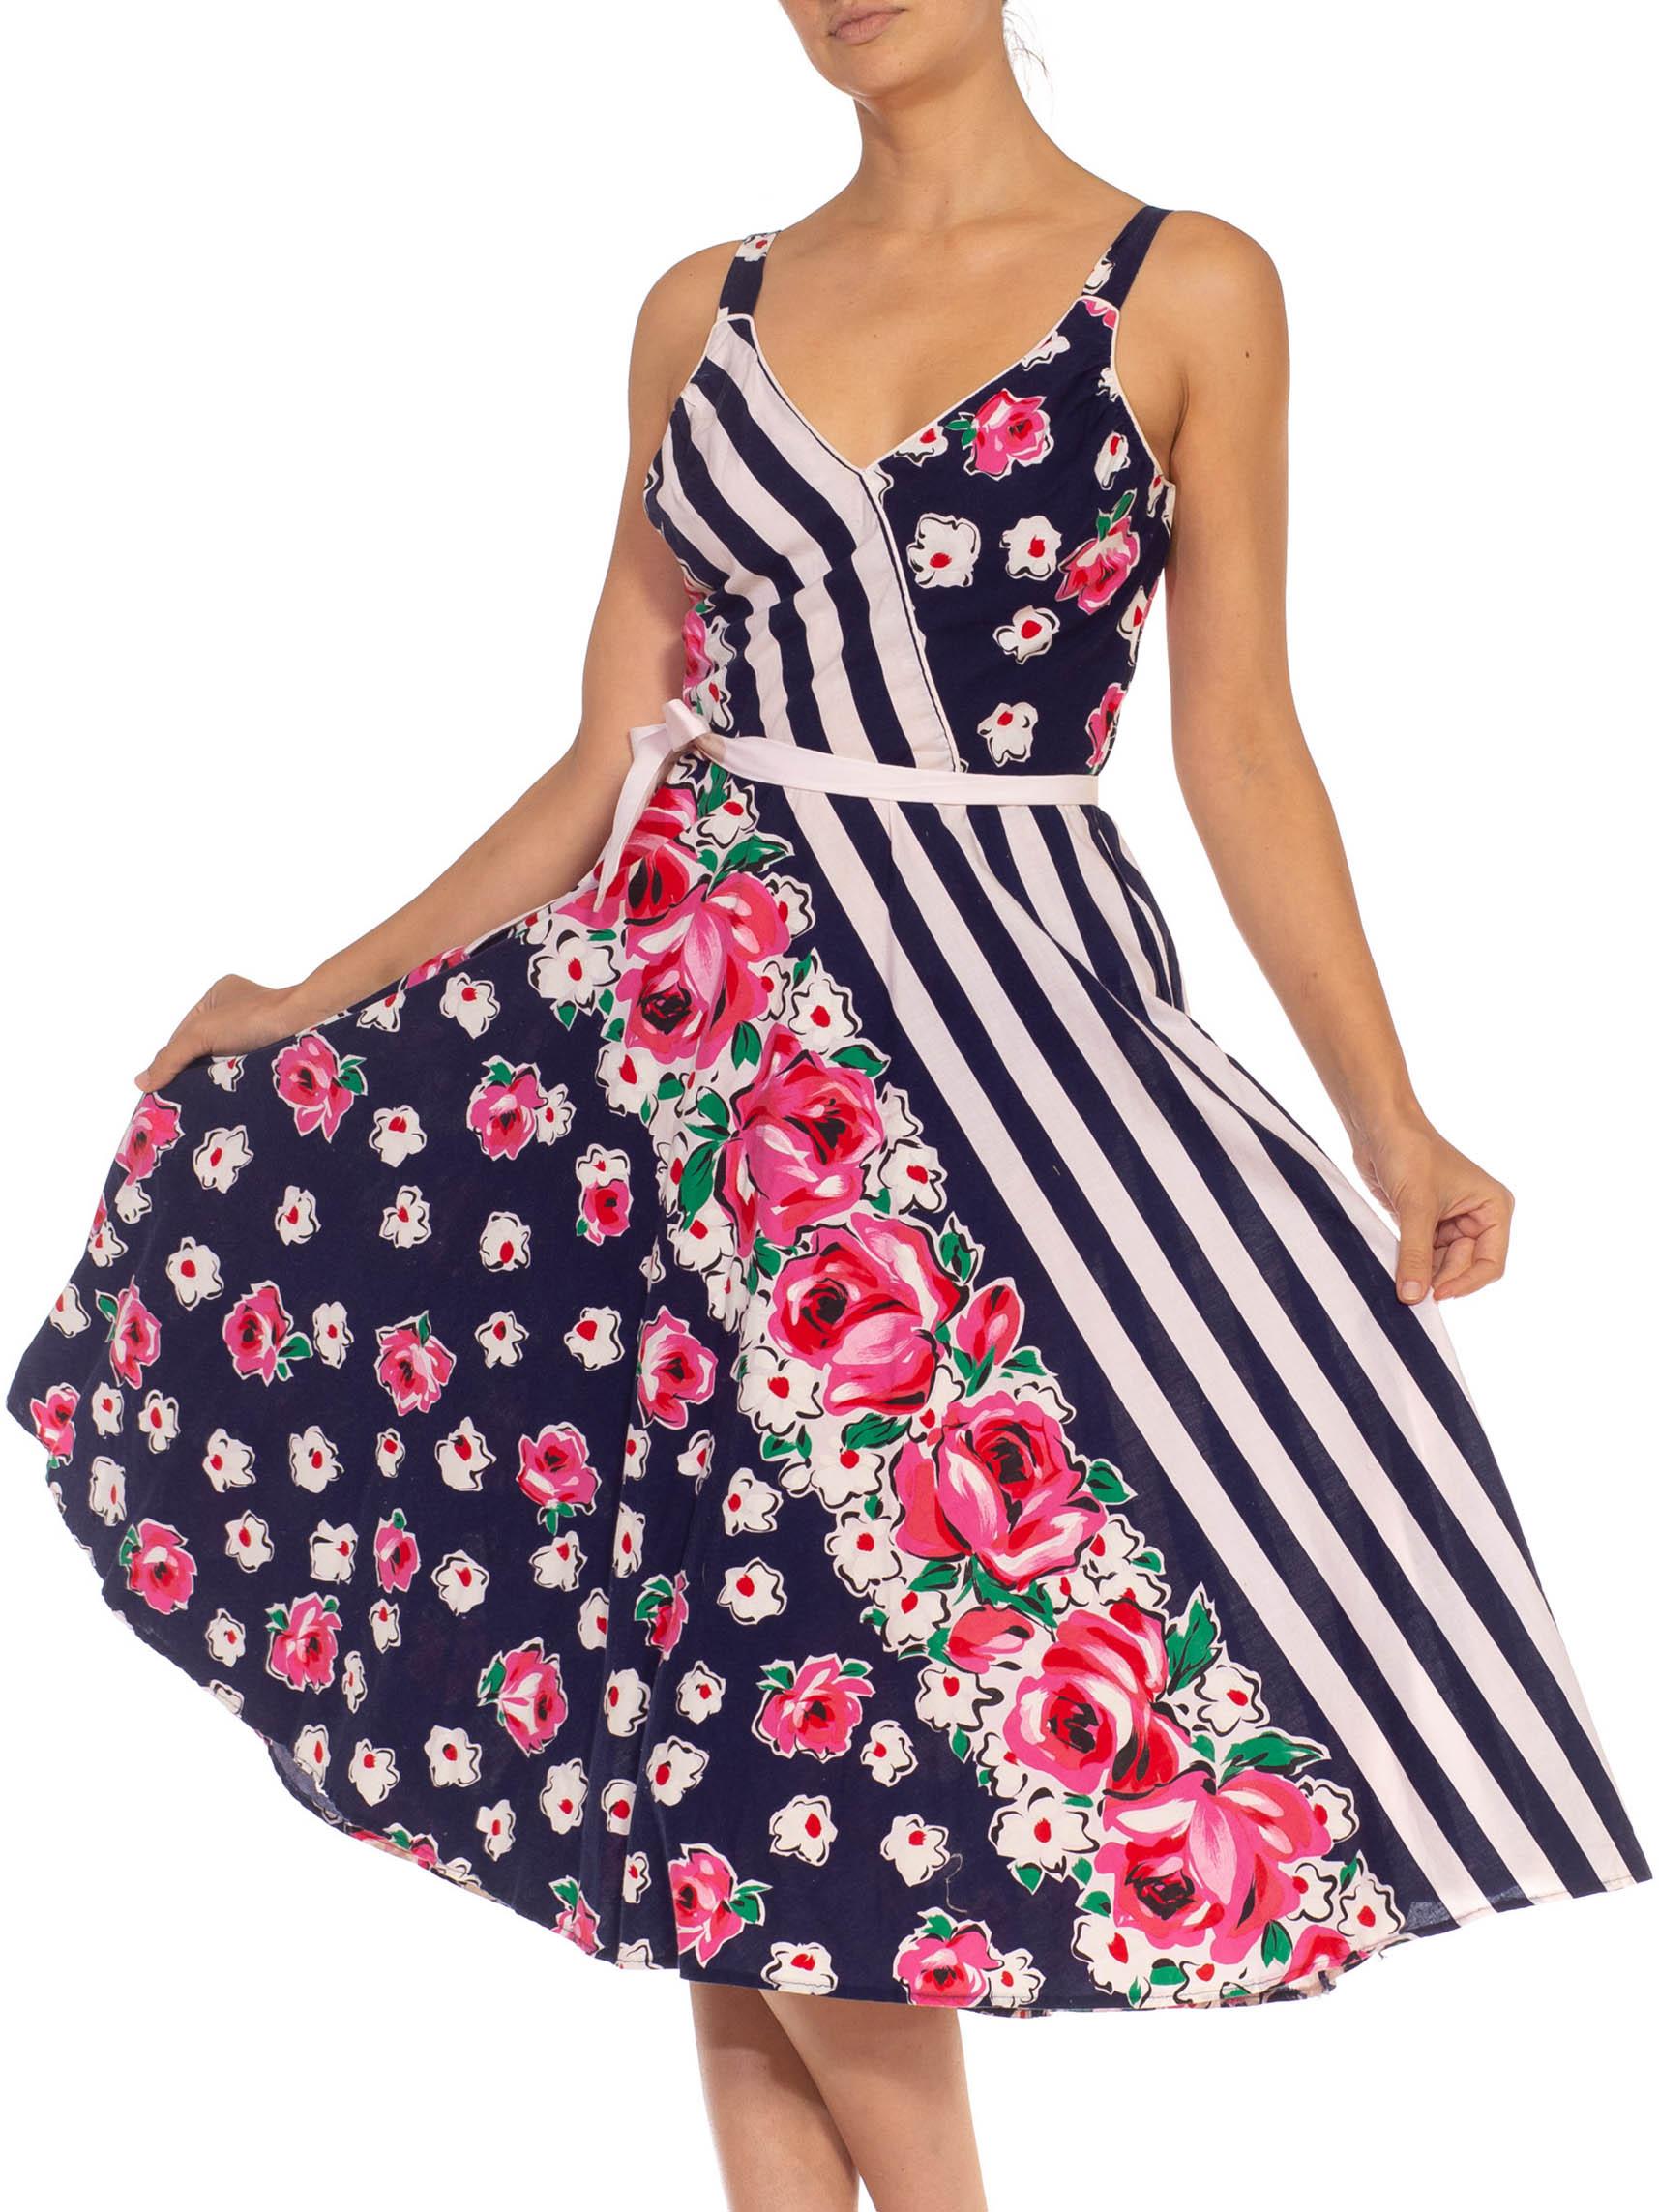 2000S Navy Blue White & Pink Cotton Stripe Floral Printed Dress Linen With Bra For Sale 1